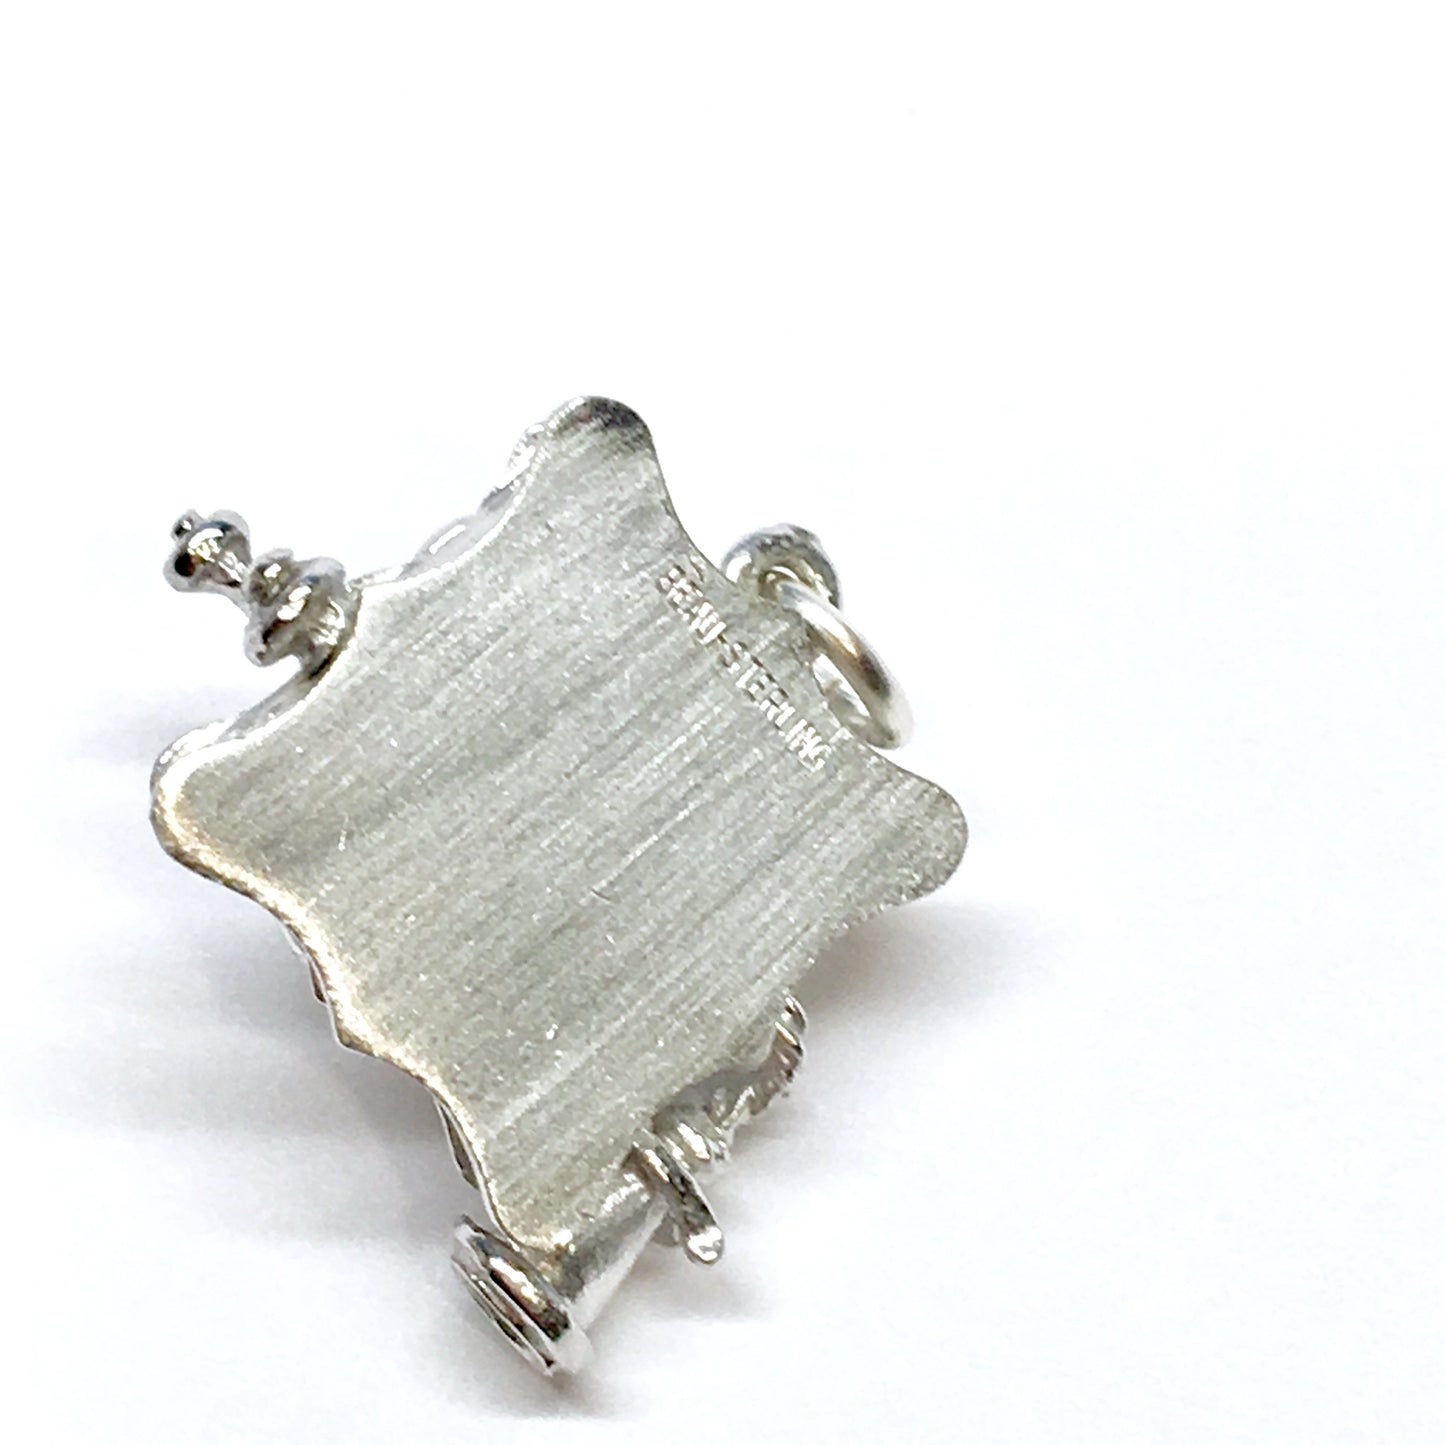 Vintage Jewelry > 3D Charms | Oddities - Sterling Silver Embellished Hand Crank Phone Charm